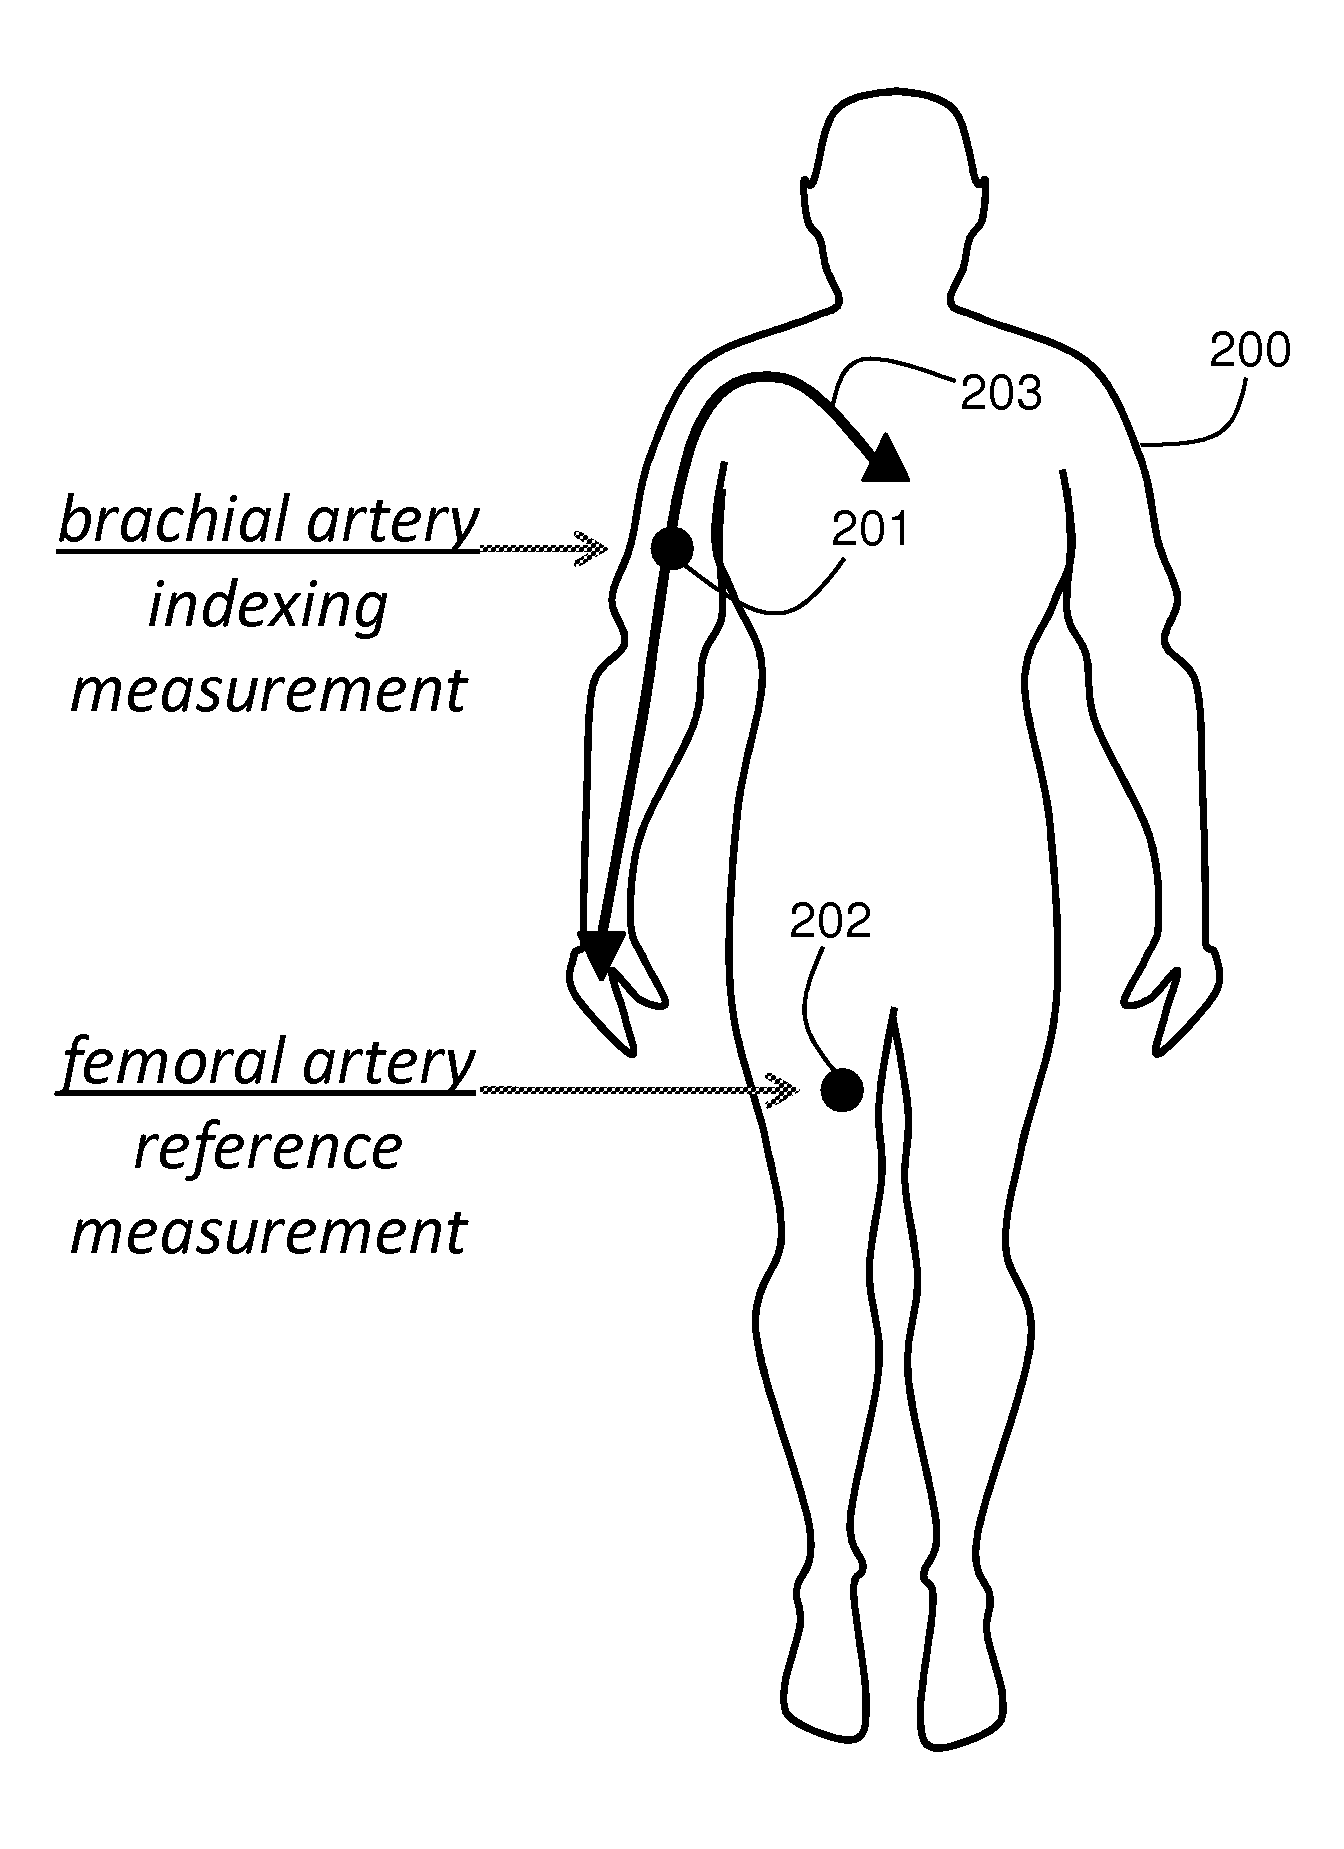 BODY-WORN SYSTEM FOR MEASURING CONTINUOUS NON-INVASIVE BLOOD PRESSURE (cNIBP)